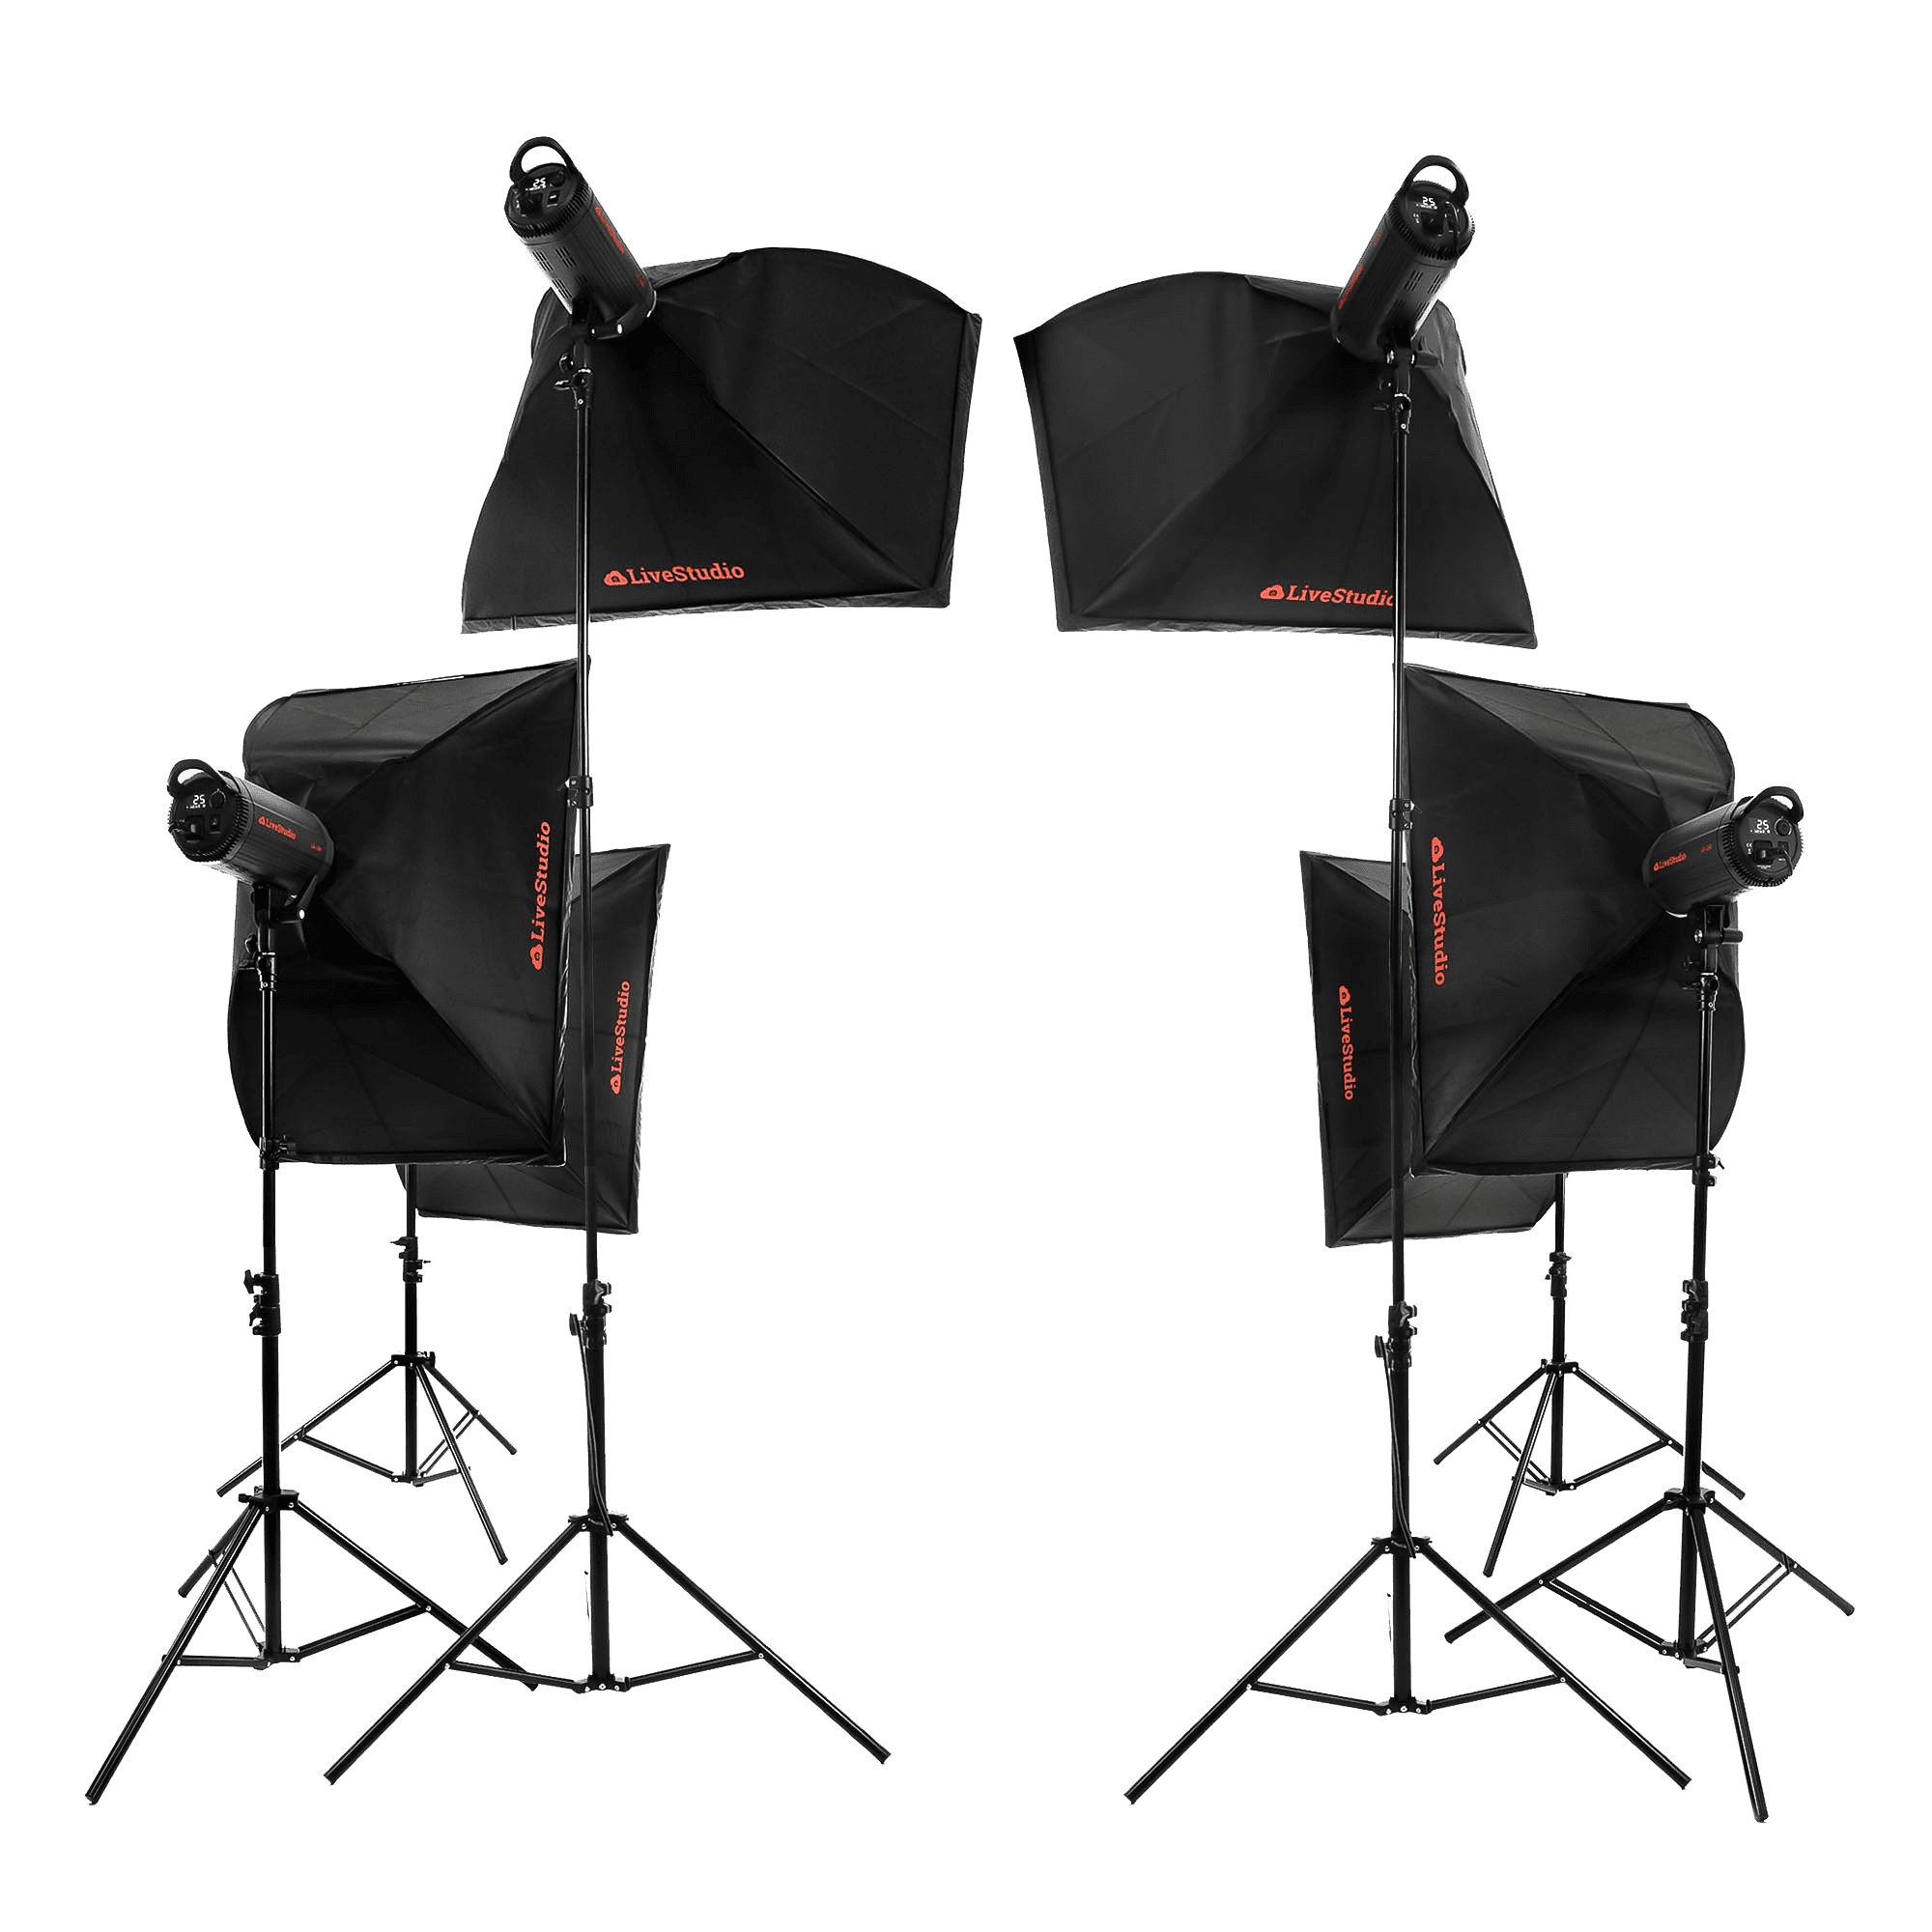 Ortery LiveStudio - 6 light product photography kit and software